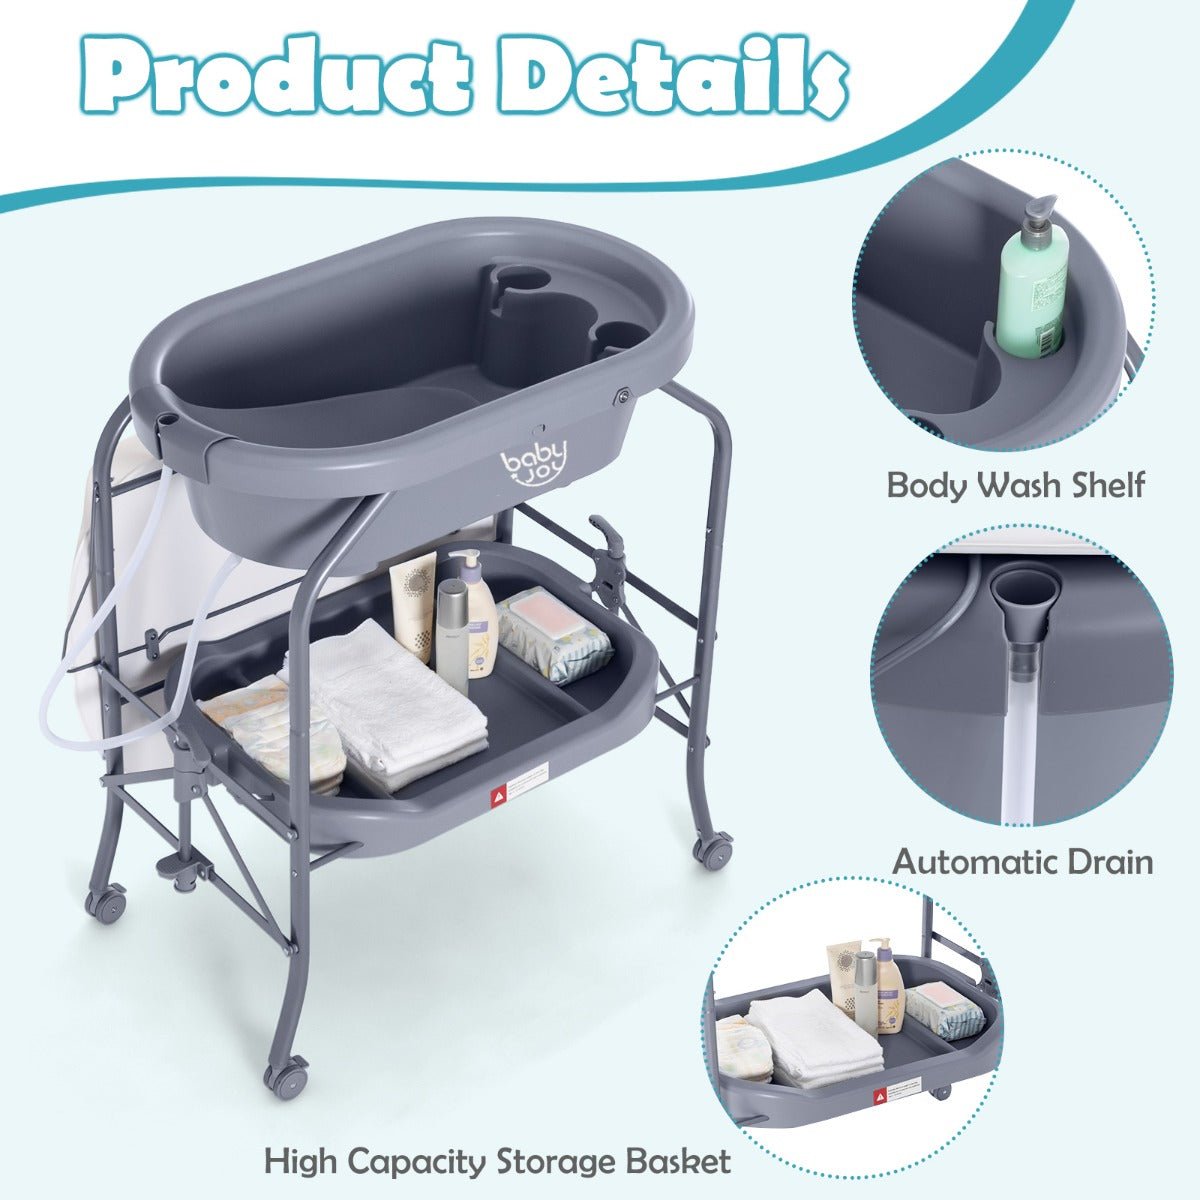 2 in 1 Baby Changing Table: Where Convenience Meets Infant Care